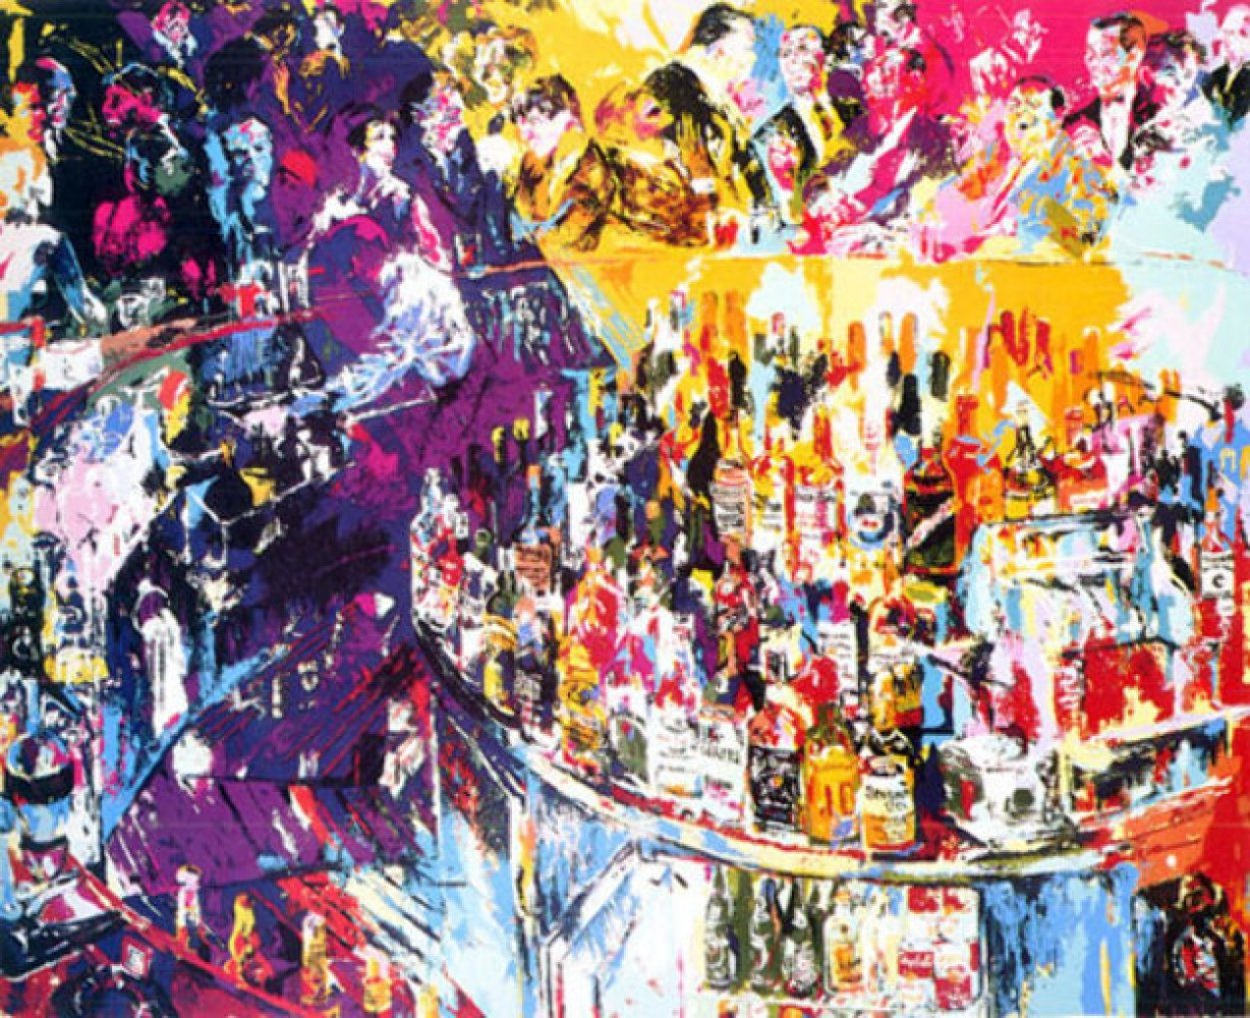 Toots Shor Bar AP 1975 Limited Edition Print by LeRoy Neiman